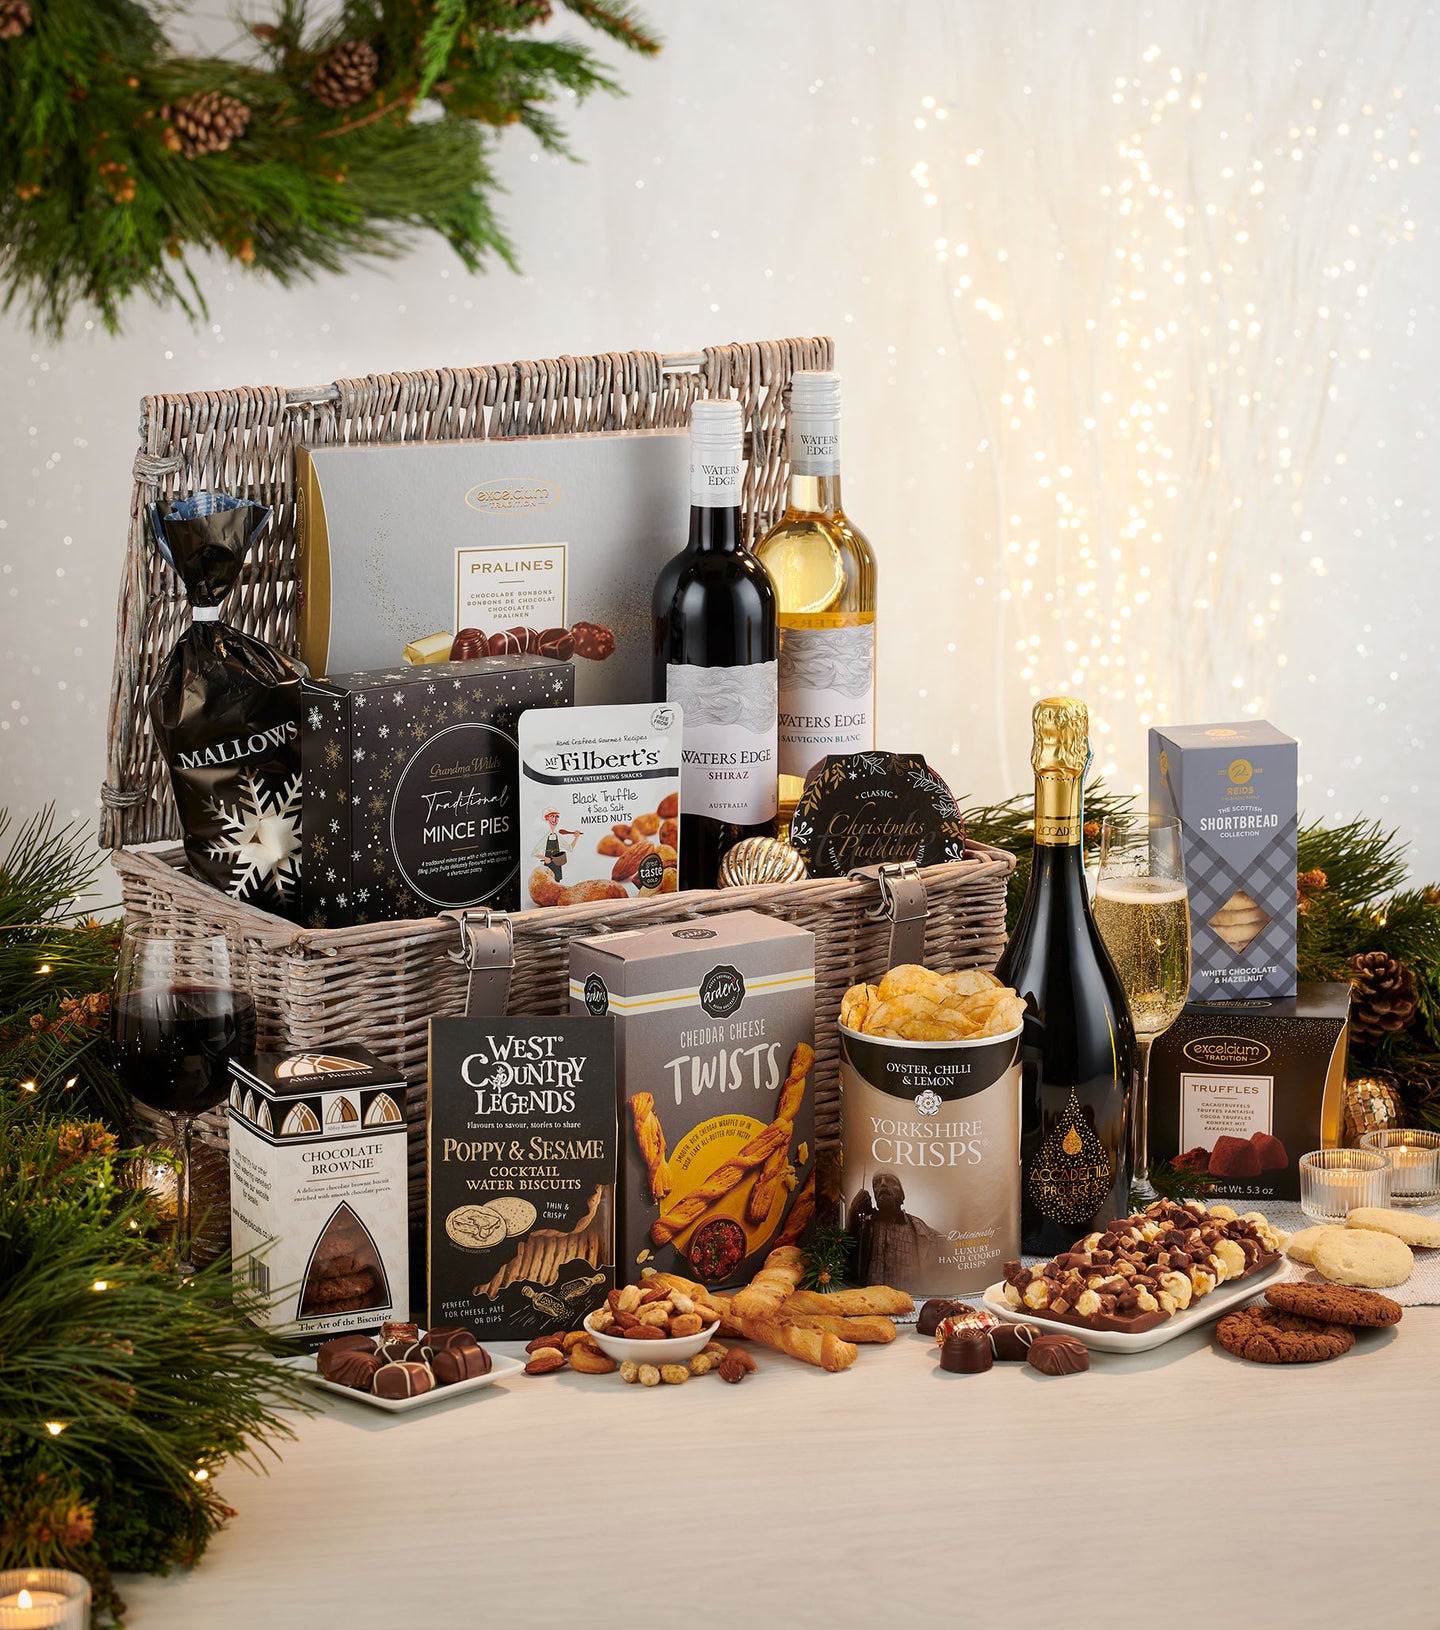 One of our luxury Christmas hampers from the new Christmas 2023 range at Spicers of Hythe featuring prosecco and all kinds of artisan treats.